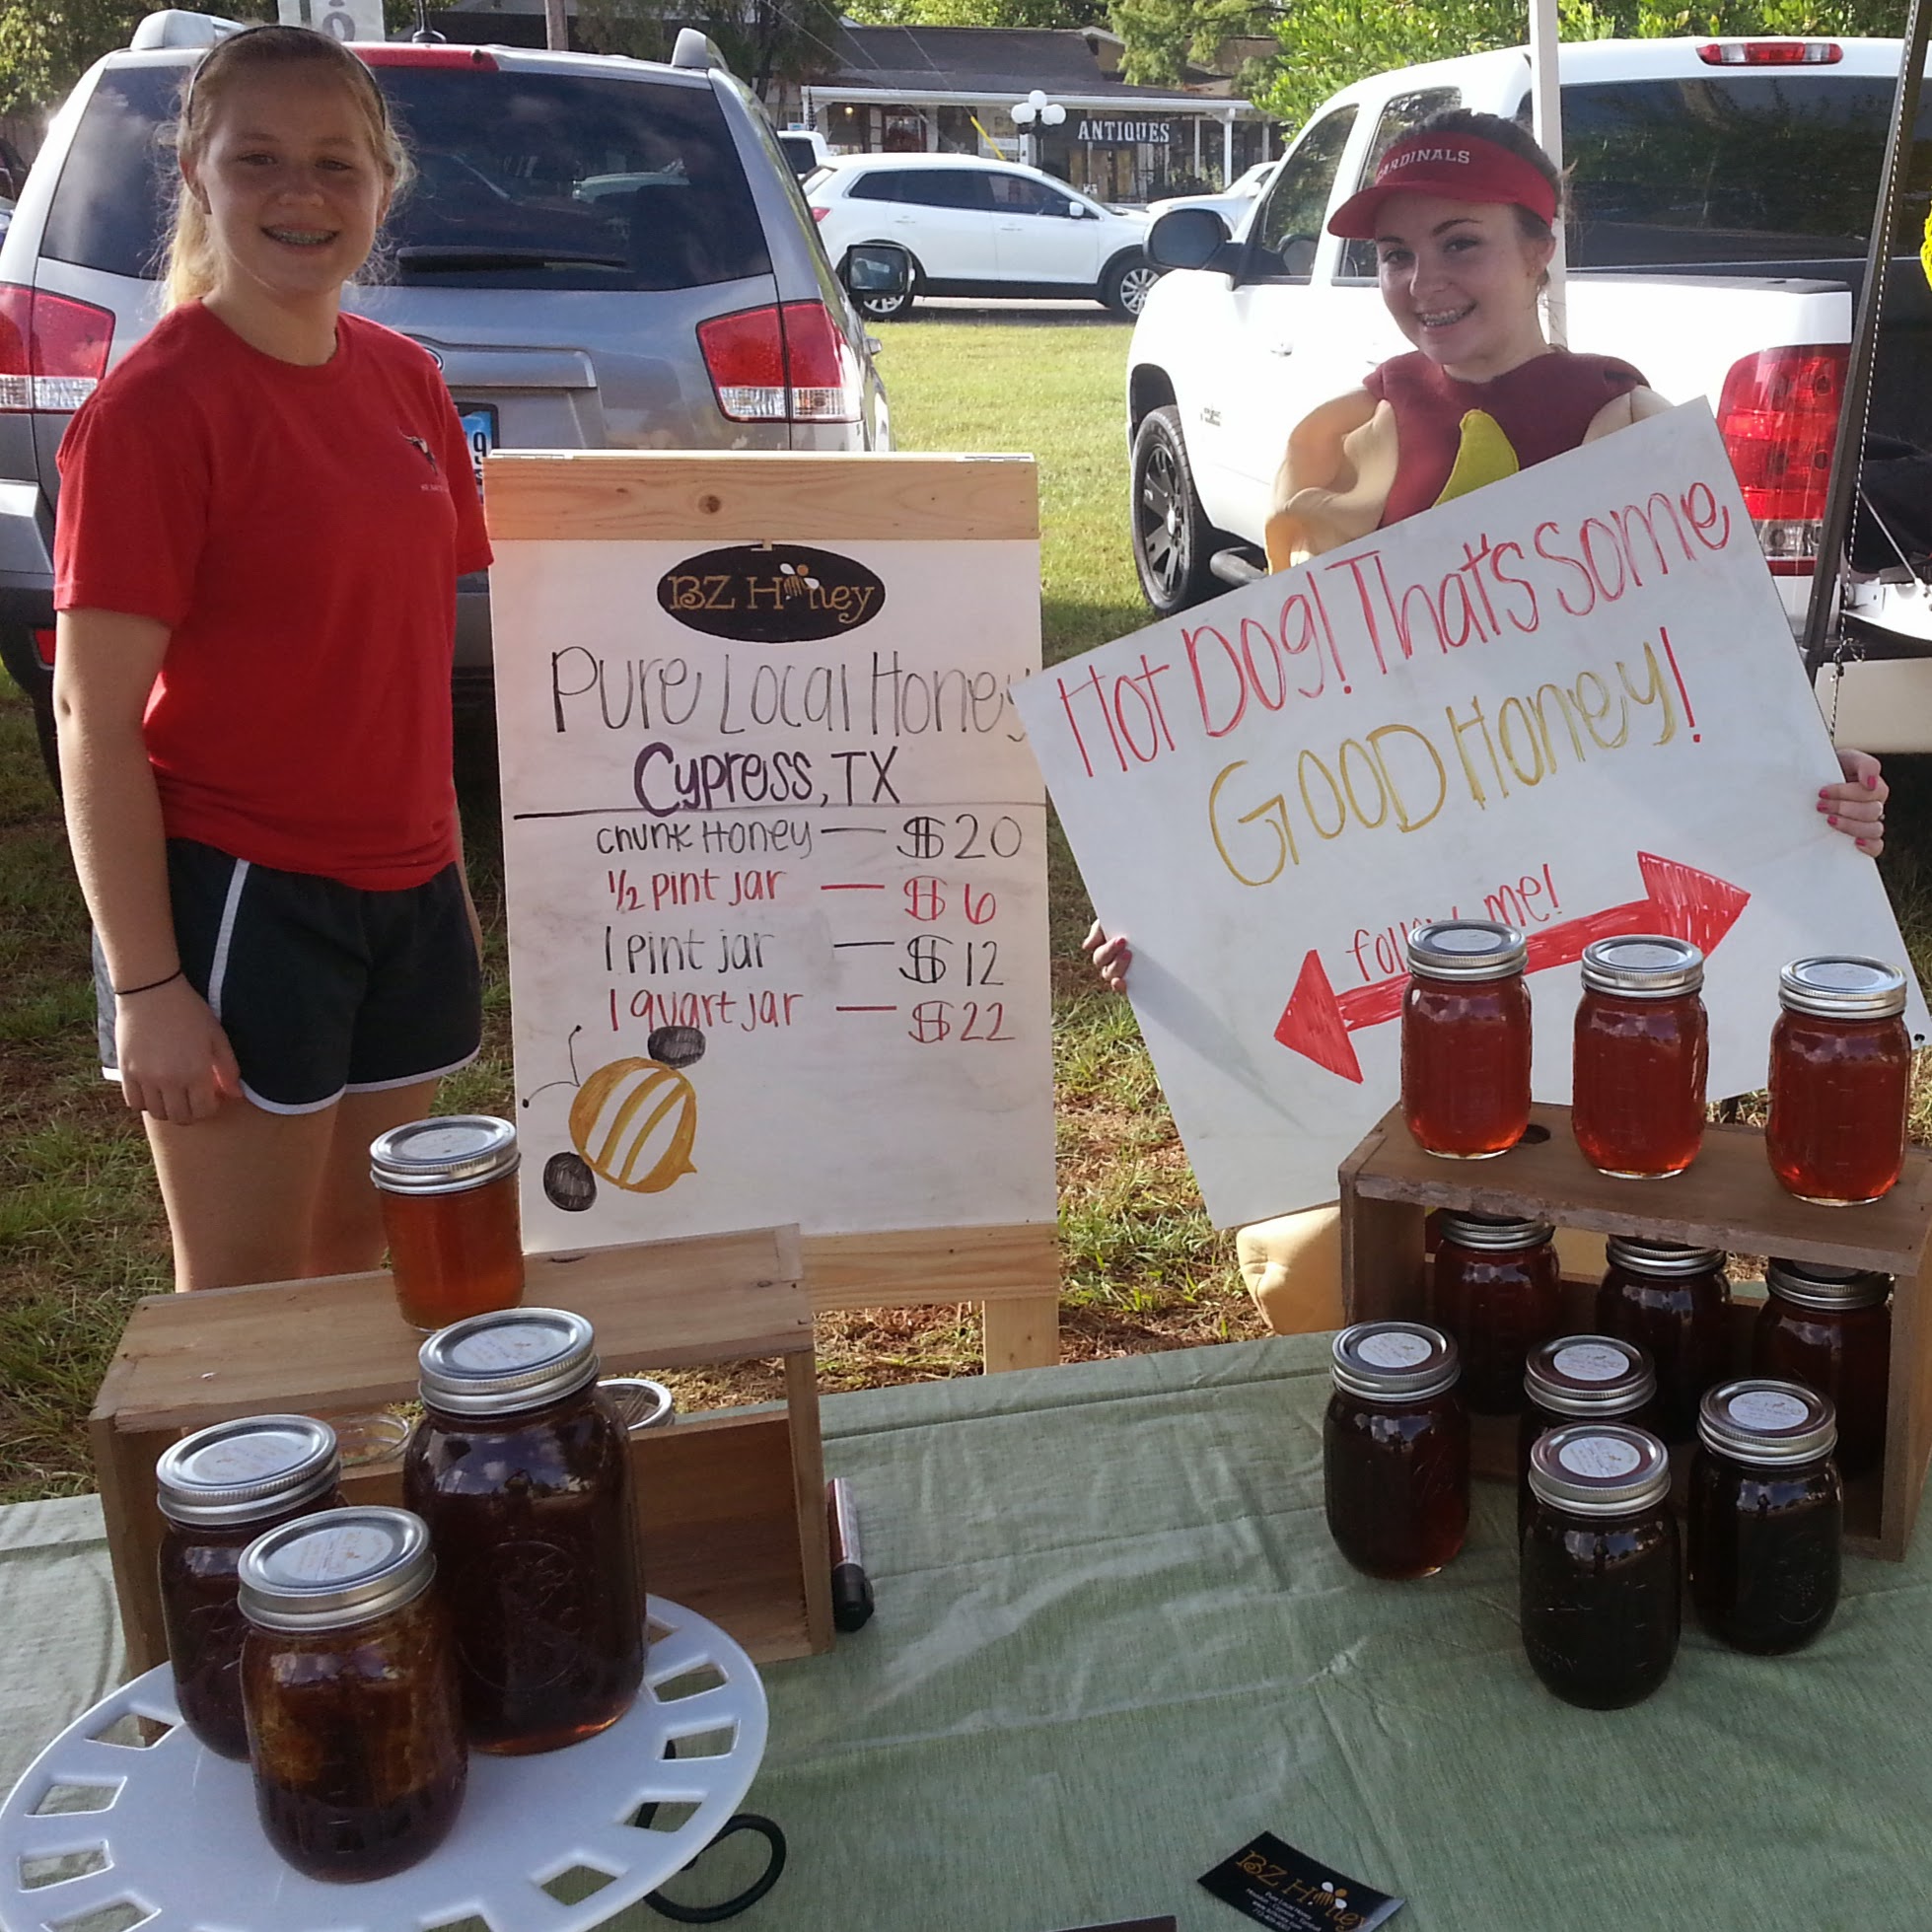 BZ Honey - Questions When Buying Local Honey